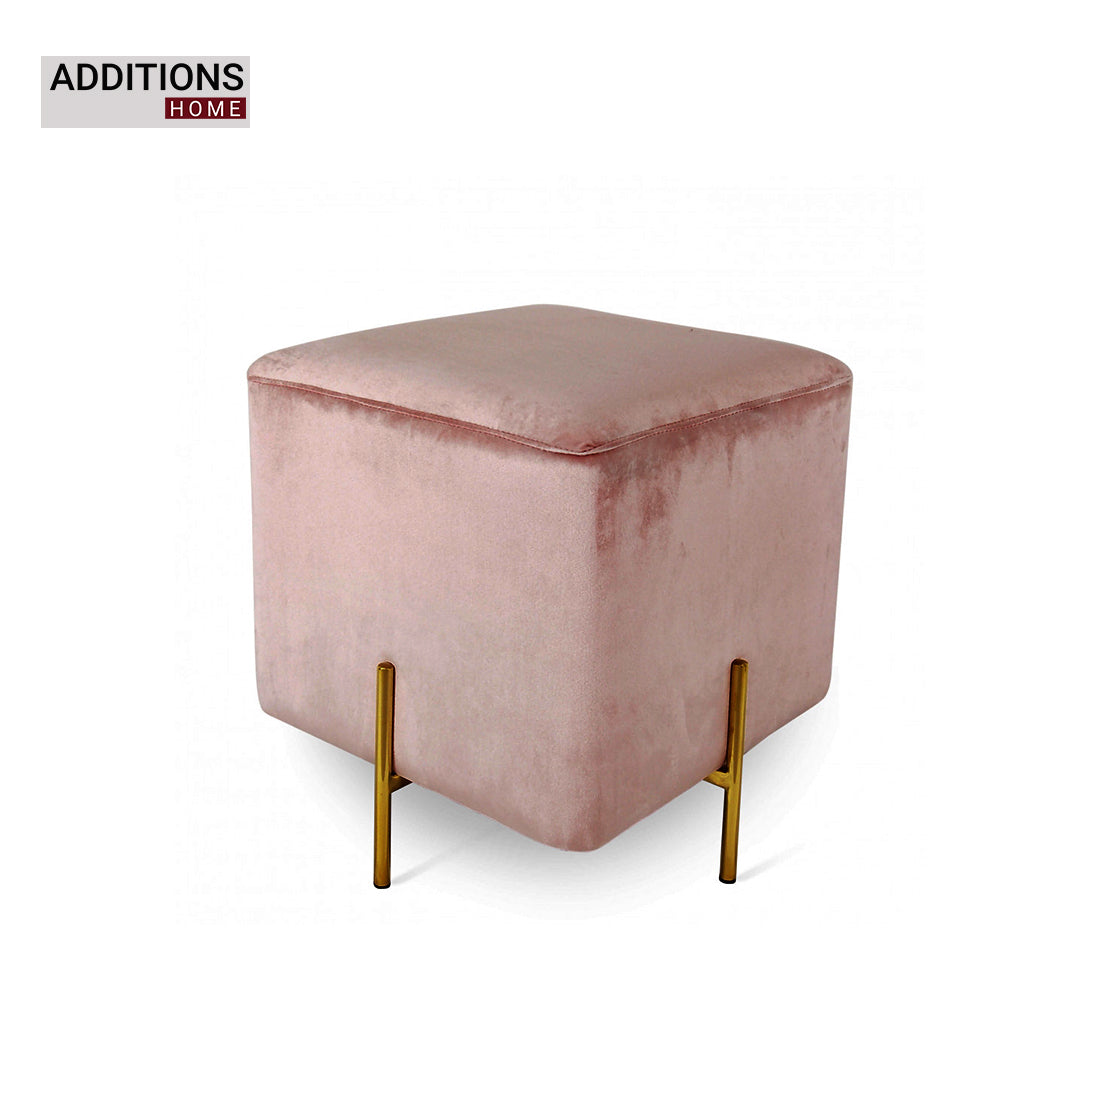 Footstool Step Stools European Style Sofa Stool Personality Living Room Cloth Change Shoe Bench Clothing Store Multifunction Household Creative.